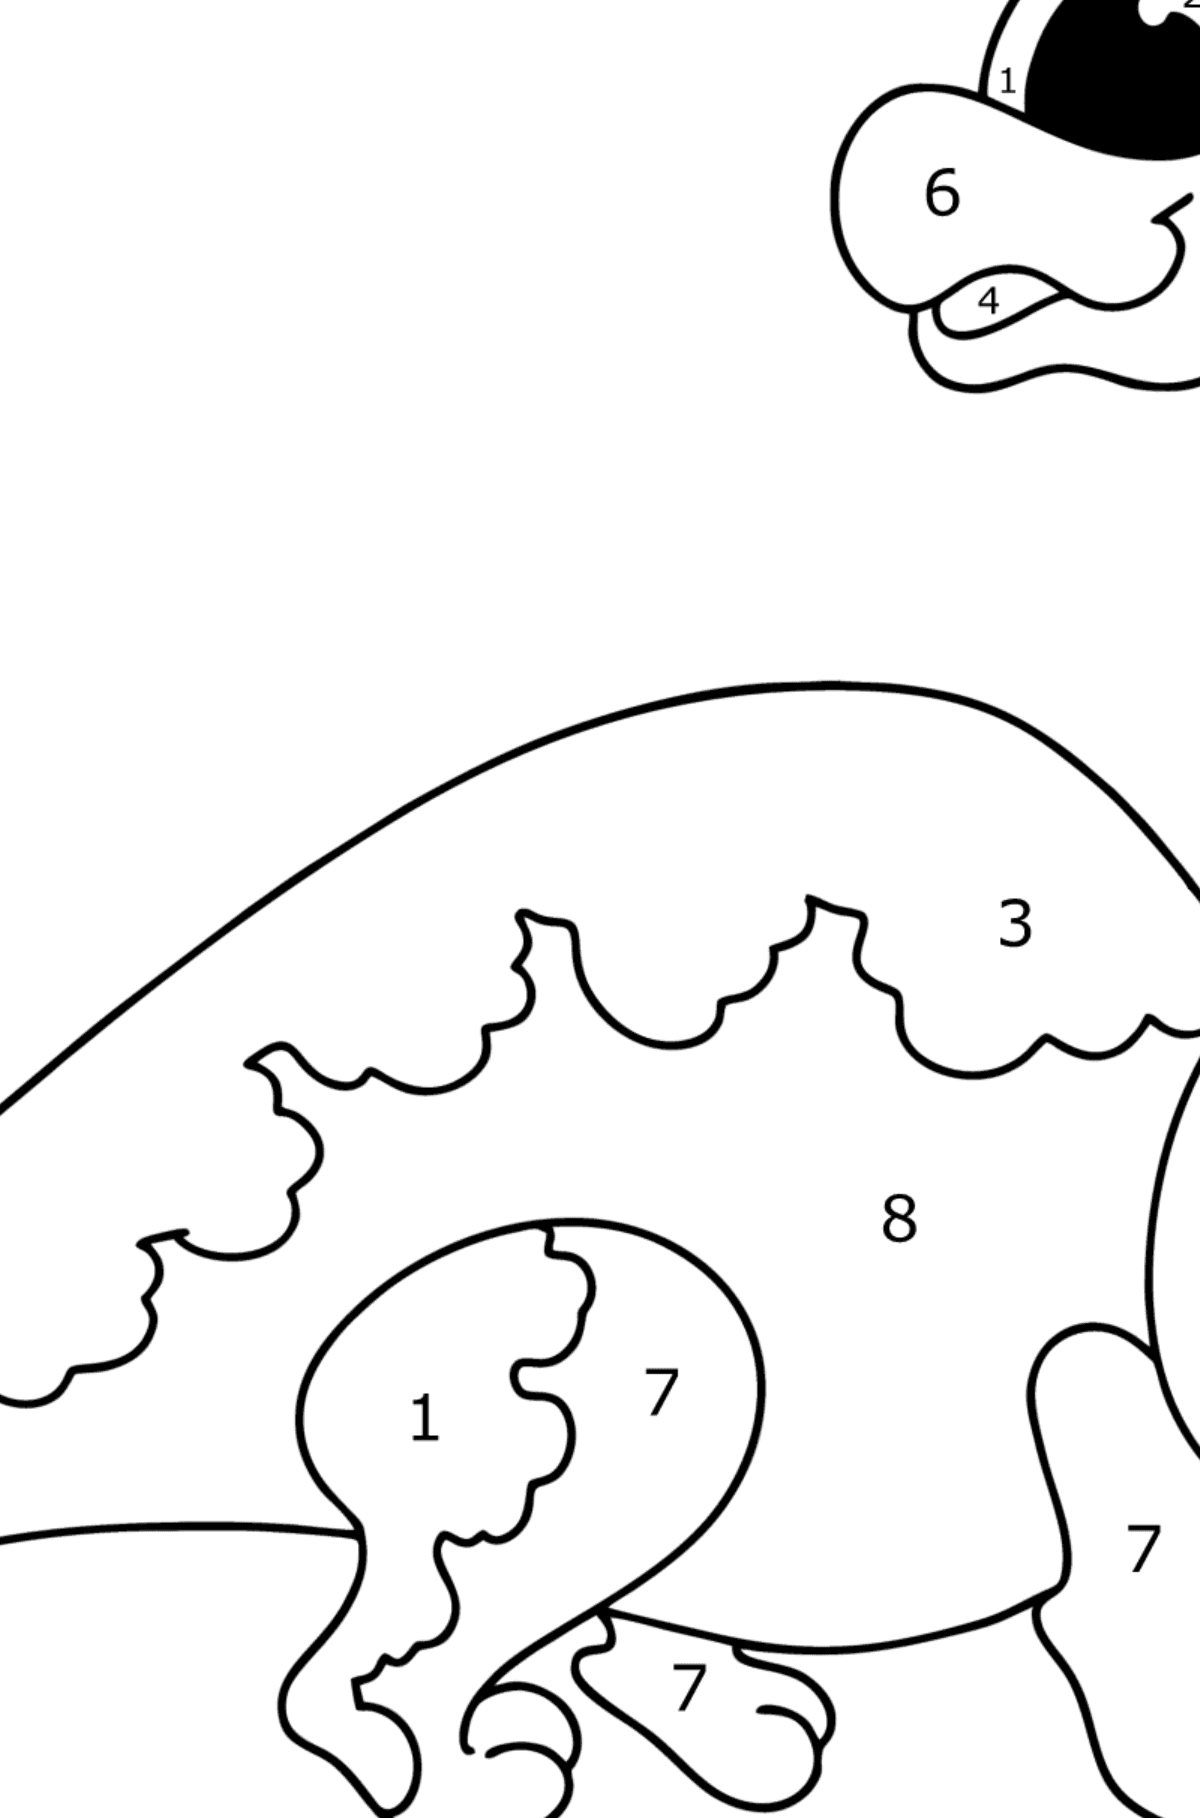 Brachiosaurus coloring page - Coloring by Numbers for Kids